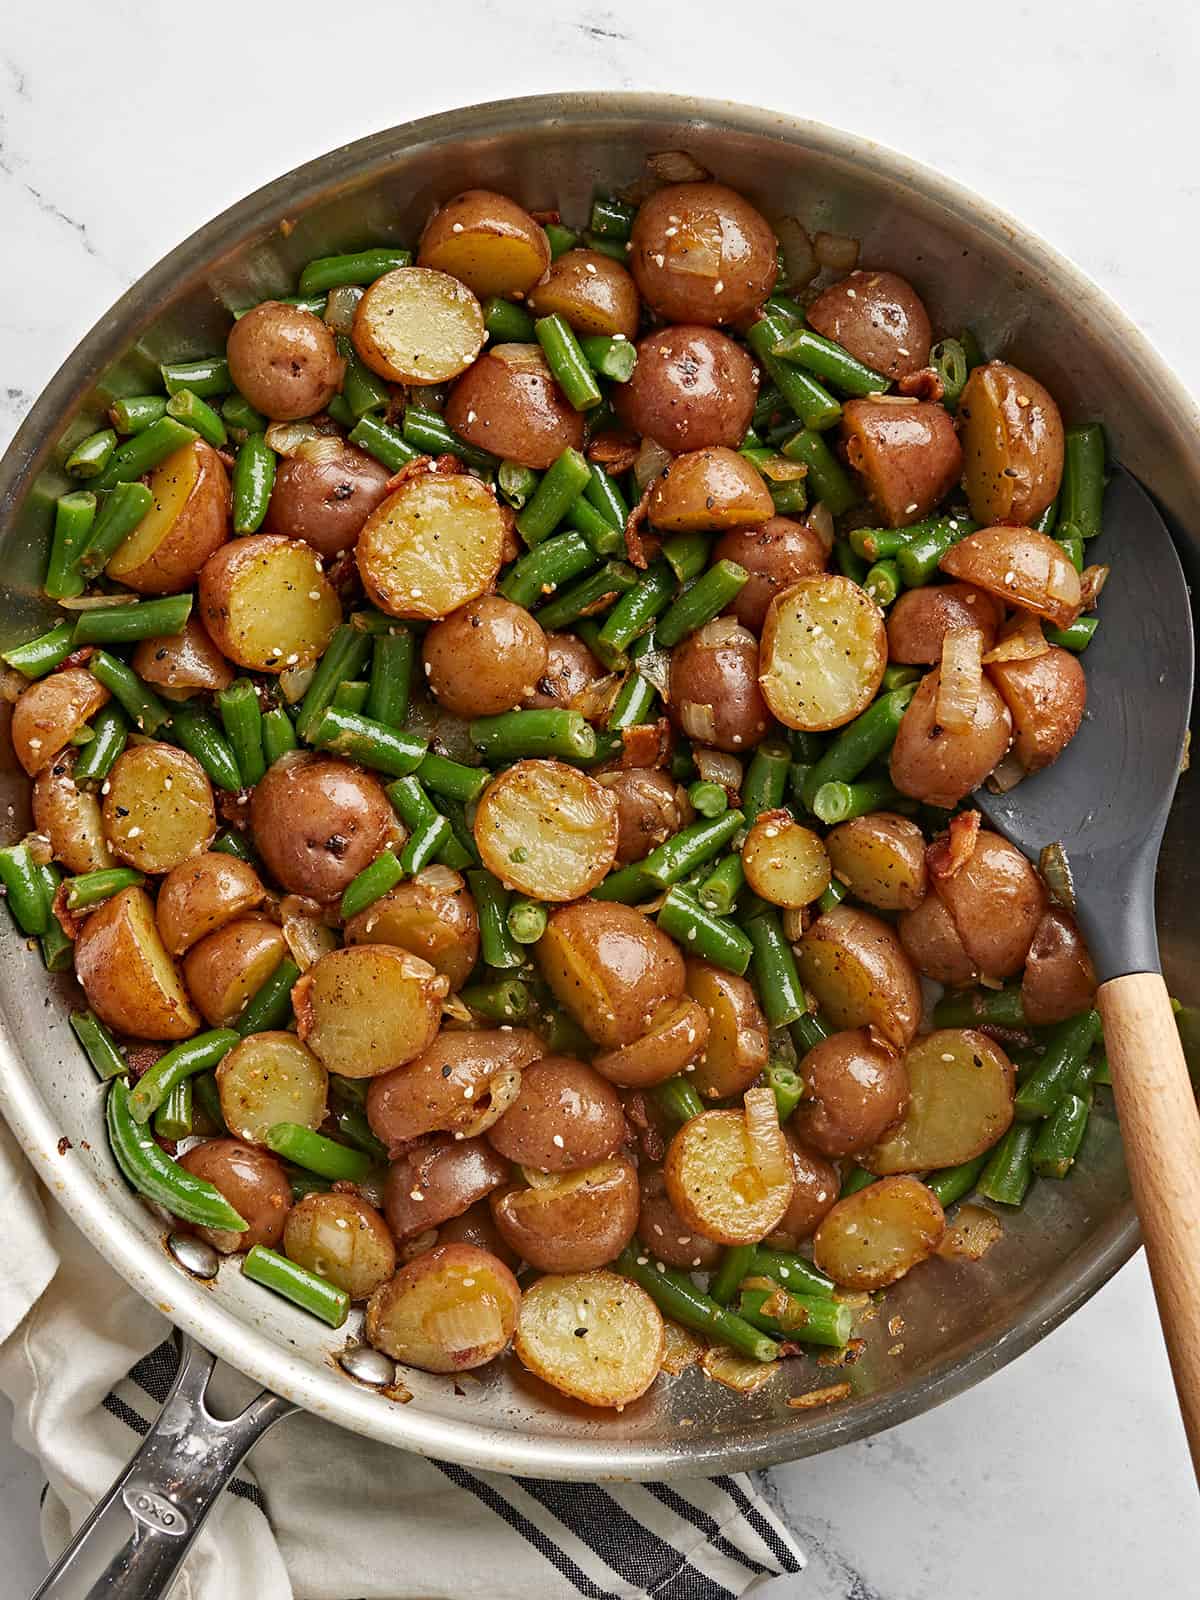 Overhead view of potato and green bean skillet with a spatula.